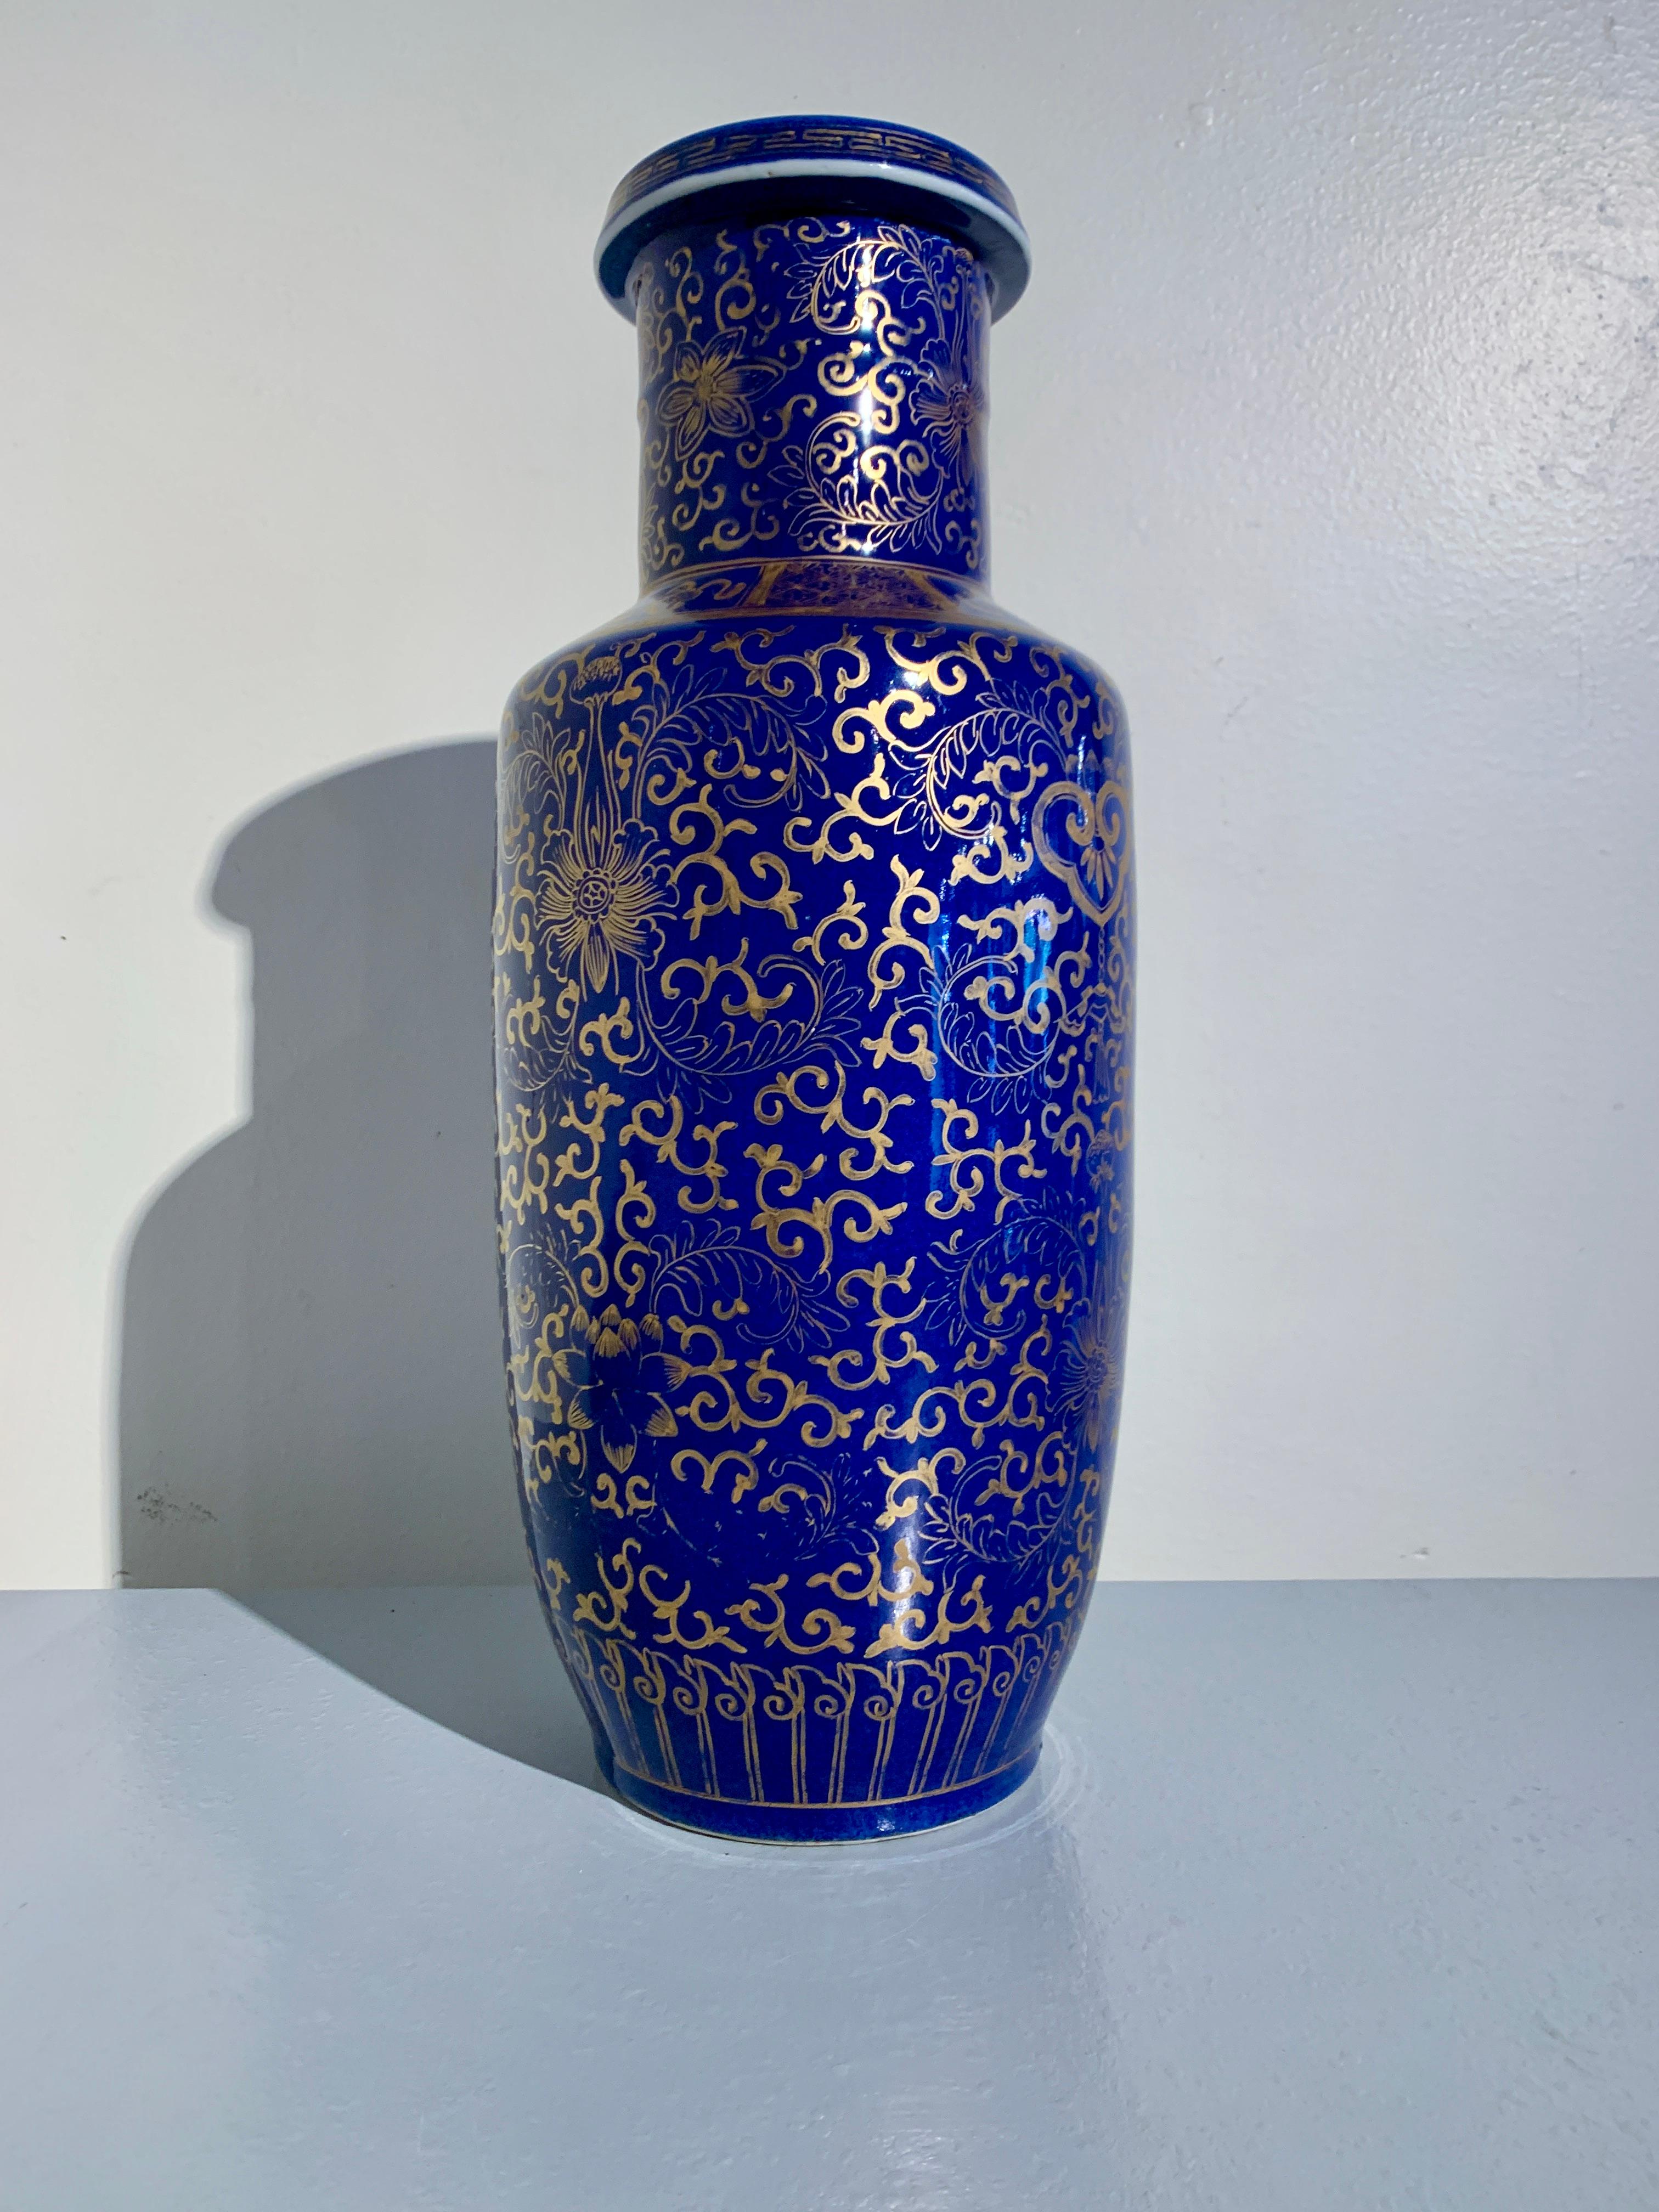 An impressive and opulent Chinese powder blue glazed porcelain rouleau vase with gilt painted decoration, very Late Qing Dynasty, circa 1900, China. 

The vase glazed in a deep and rich cobalt blue, known as powder blue, and boldly painted in